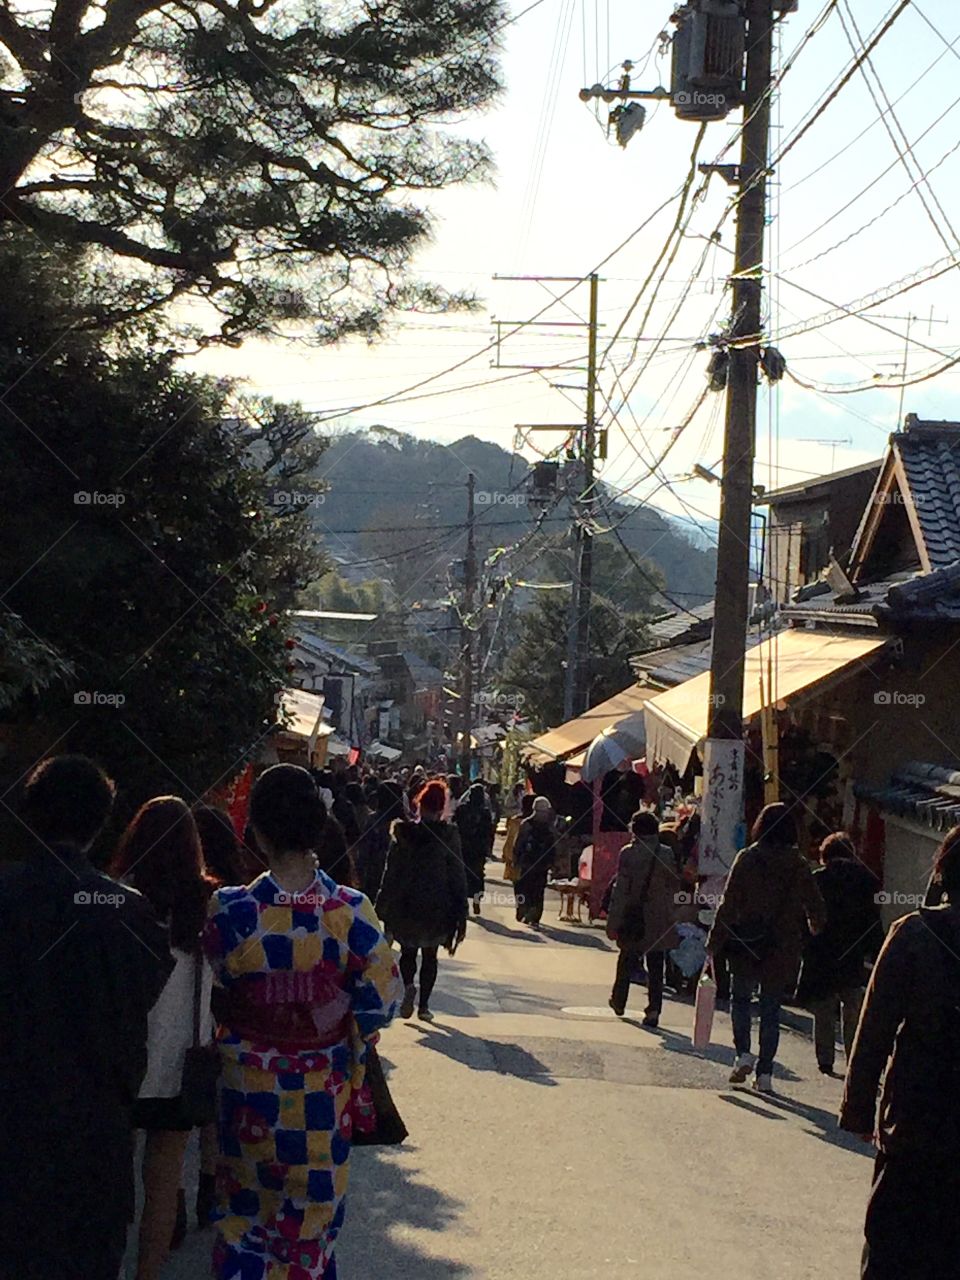 Busy street in a Japanese town